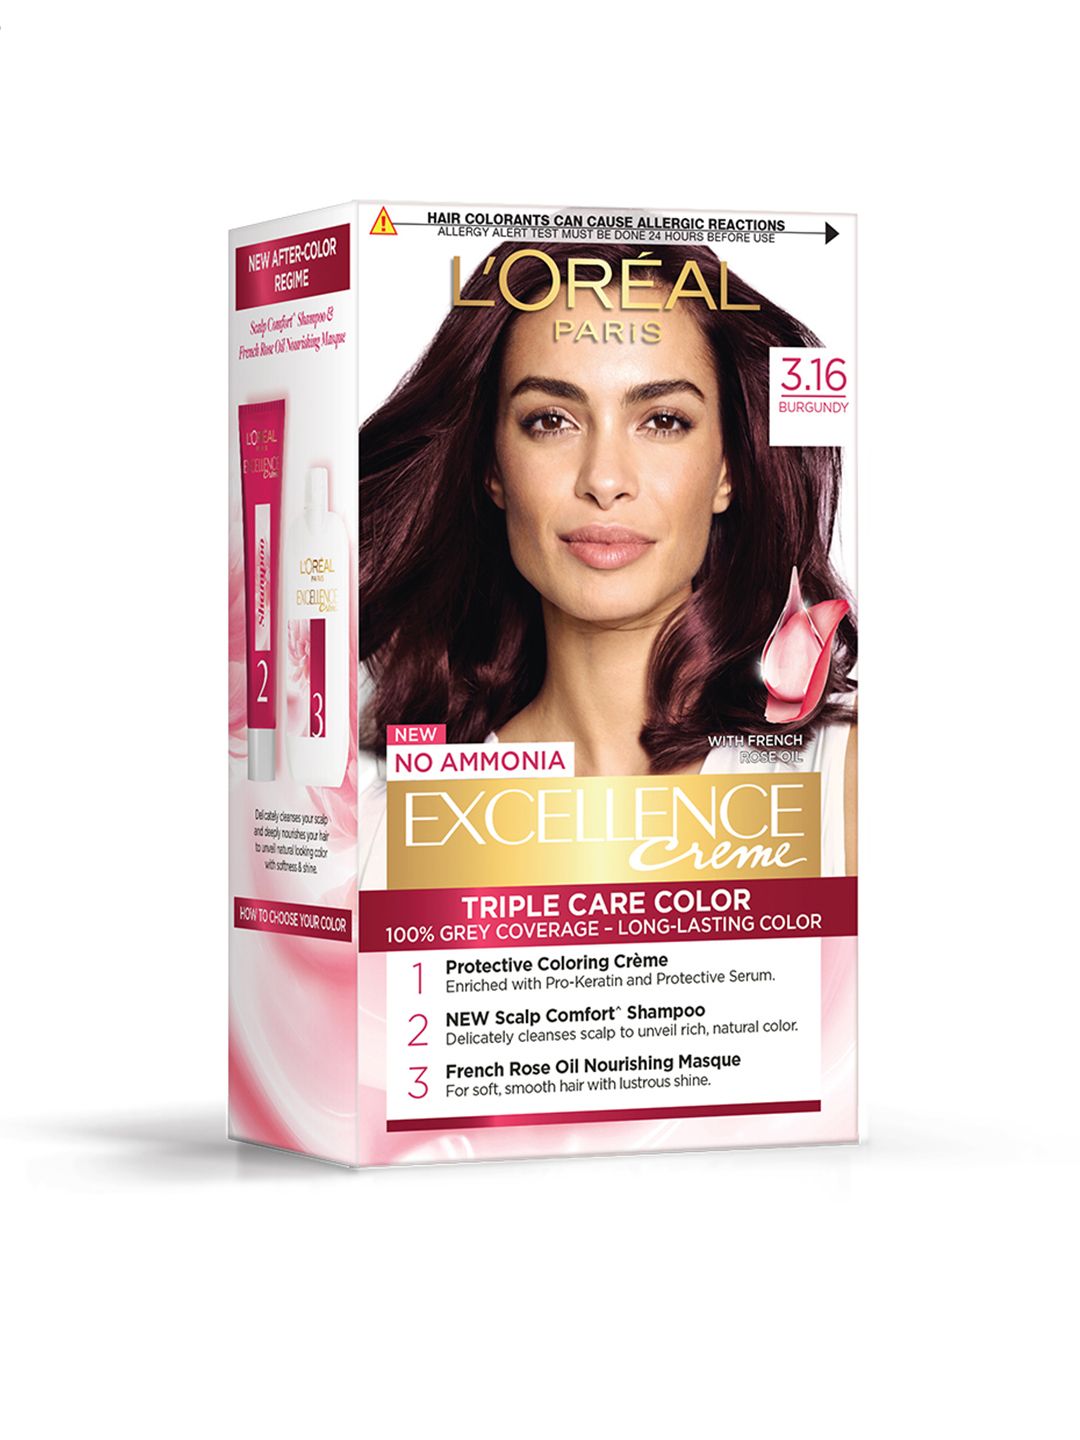 LOreal Paris Excellence Creme Triple Care Hair Color 72 ml+100g - Burgundy  3.16 Price in India